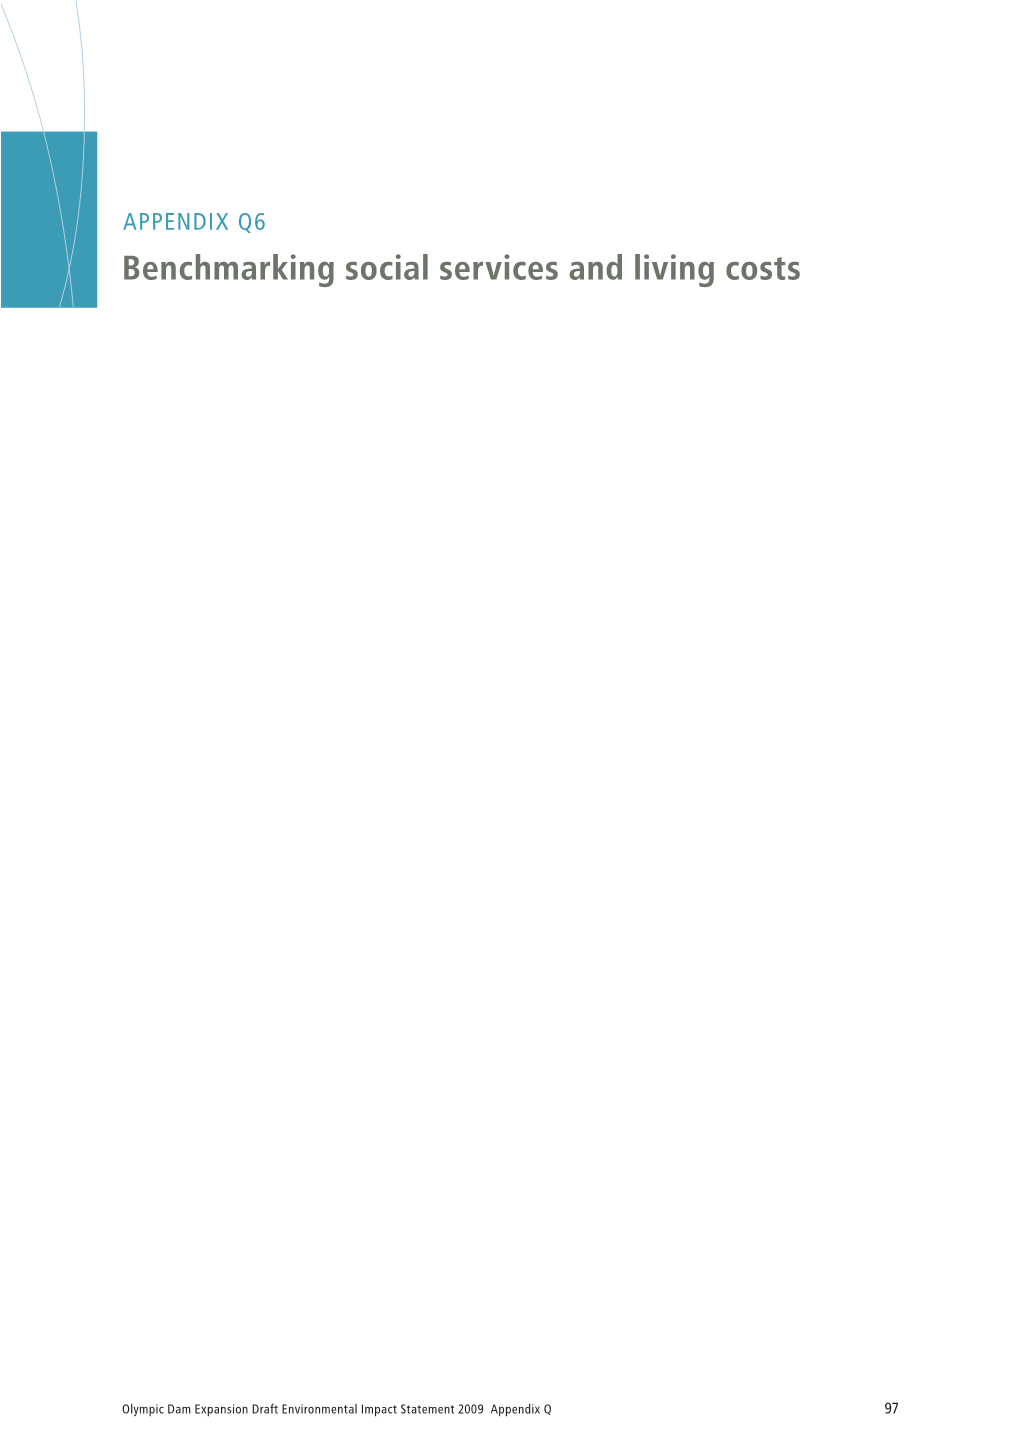 APPENDIX Q6 Benchmarking Social Services and Living Costs